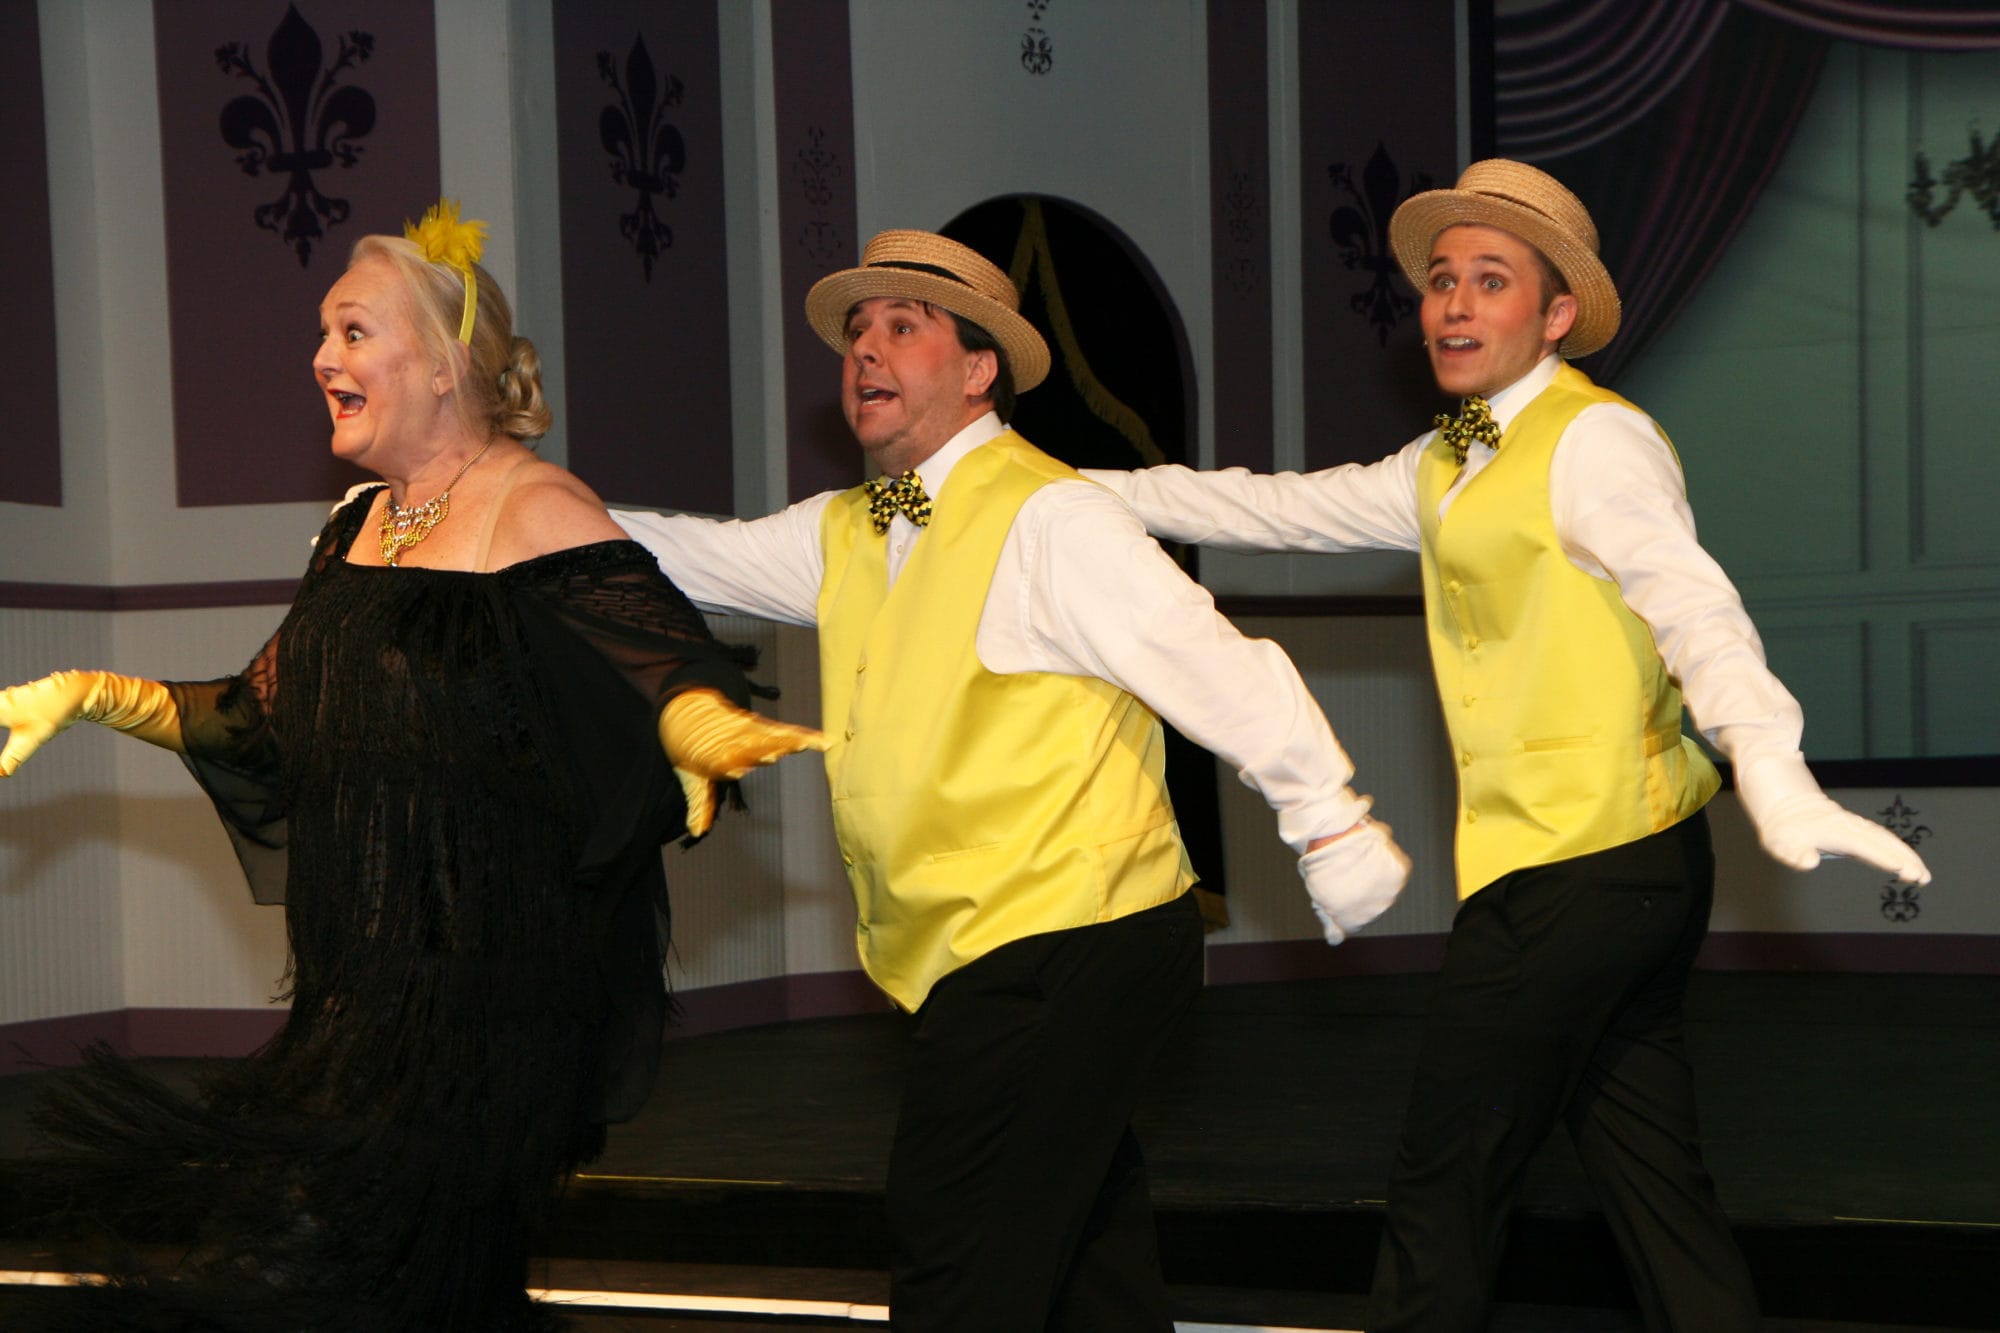 Missi Tessier, Matt Craun, and Joe Lilek perform "Be My Little Baby Bumblebee" in The British Players' Old Time Music Hall. Photo by Simmons Design.